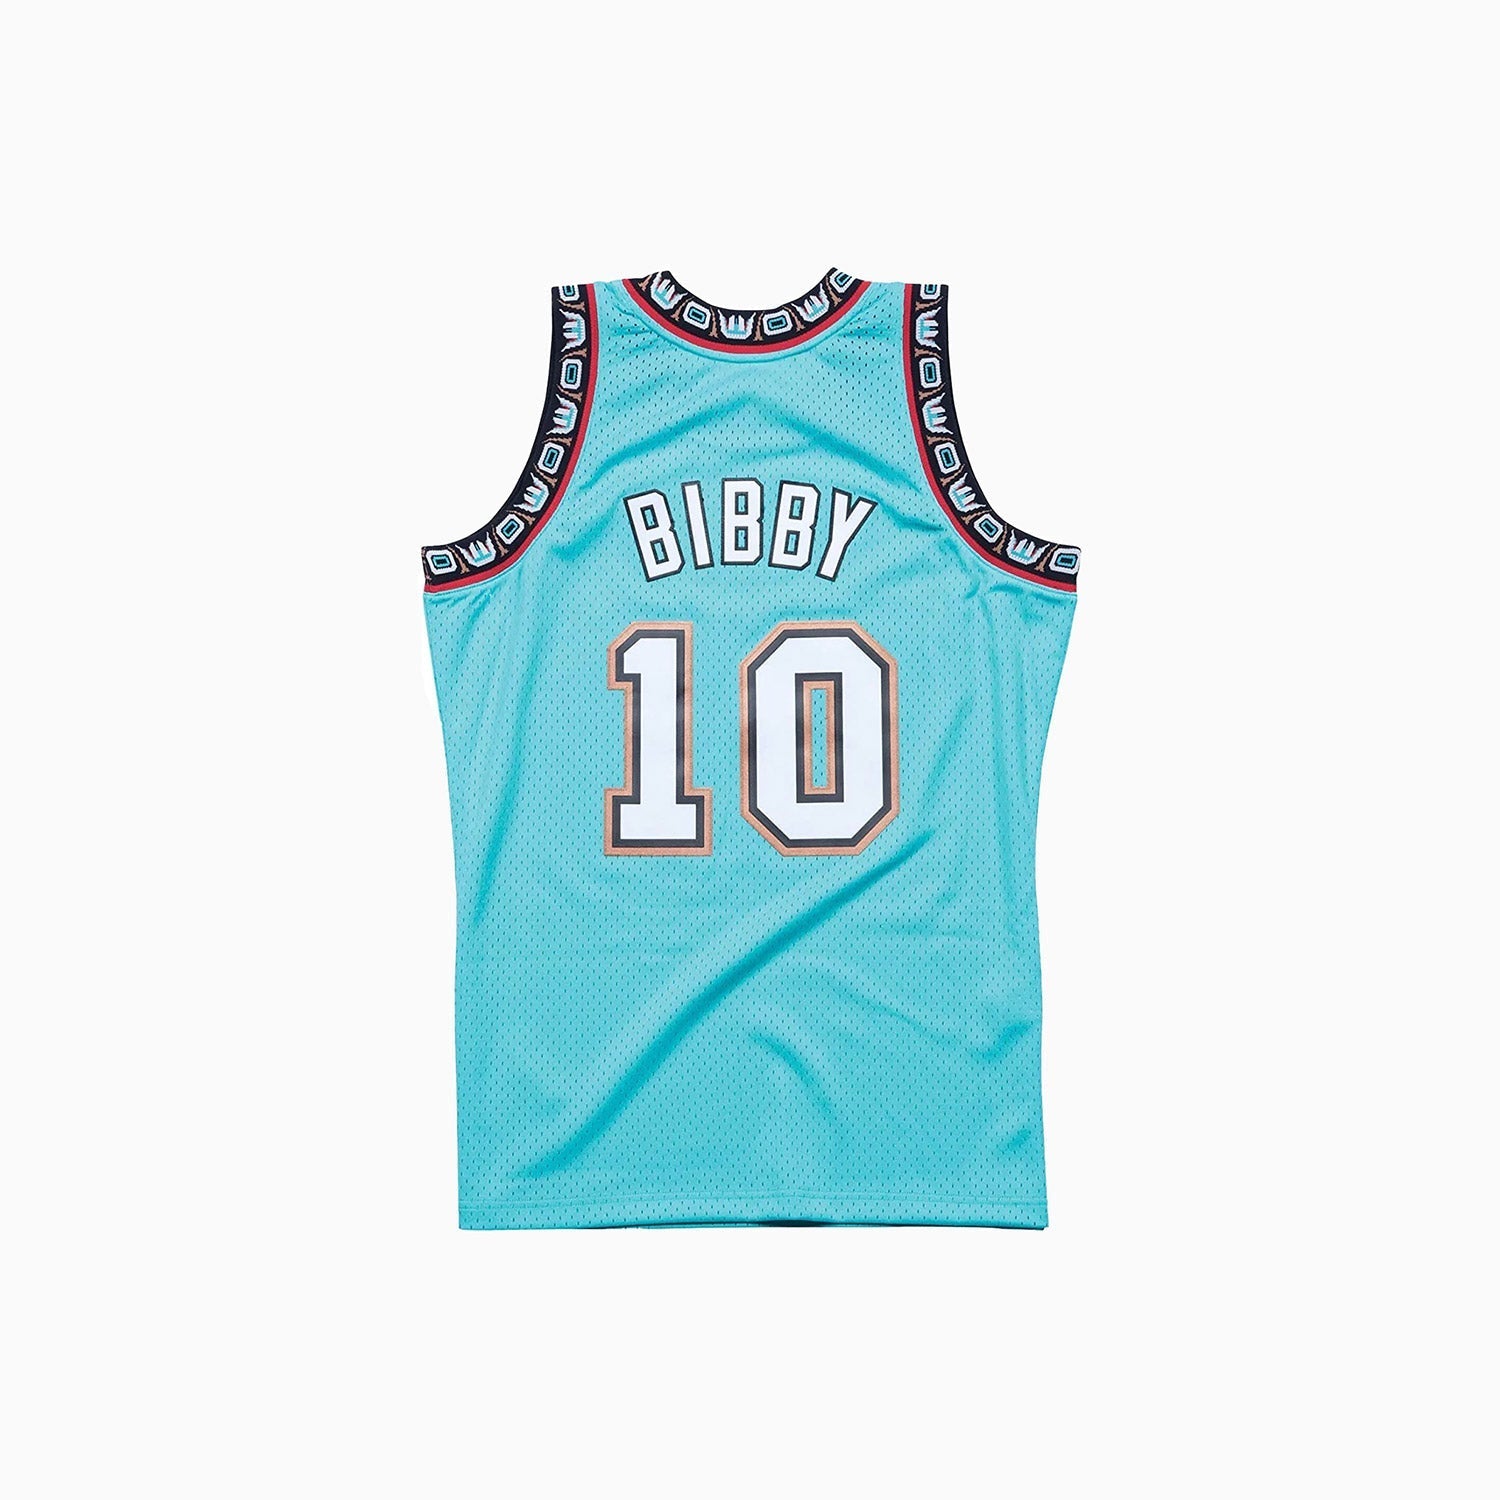 mitchell-and-ness-kids-swingman-mike-bibby-vancouver-grizzlies-nba-1998-99-jersey-9n2b3brd0-vgzmb